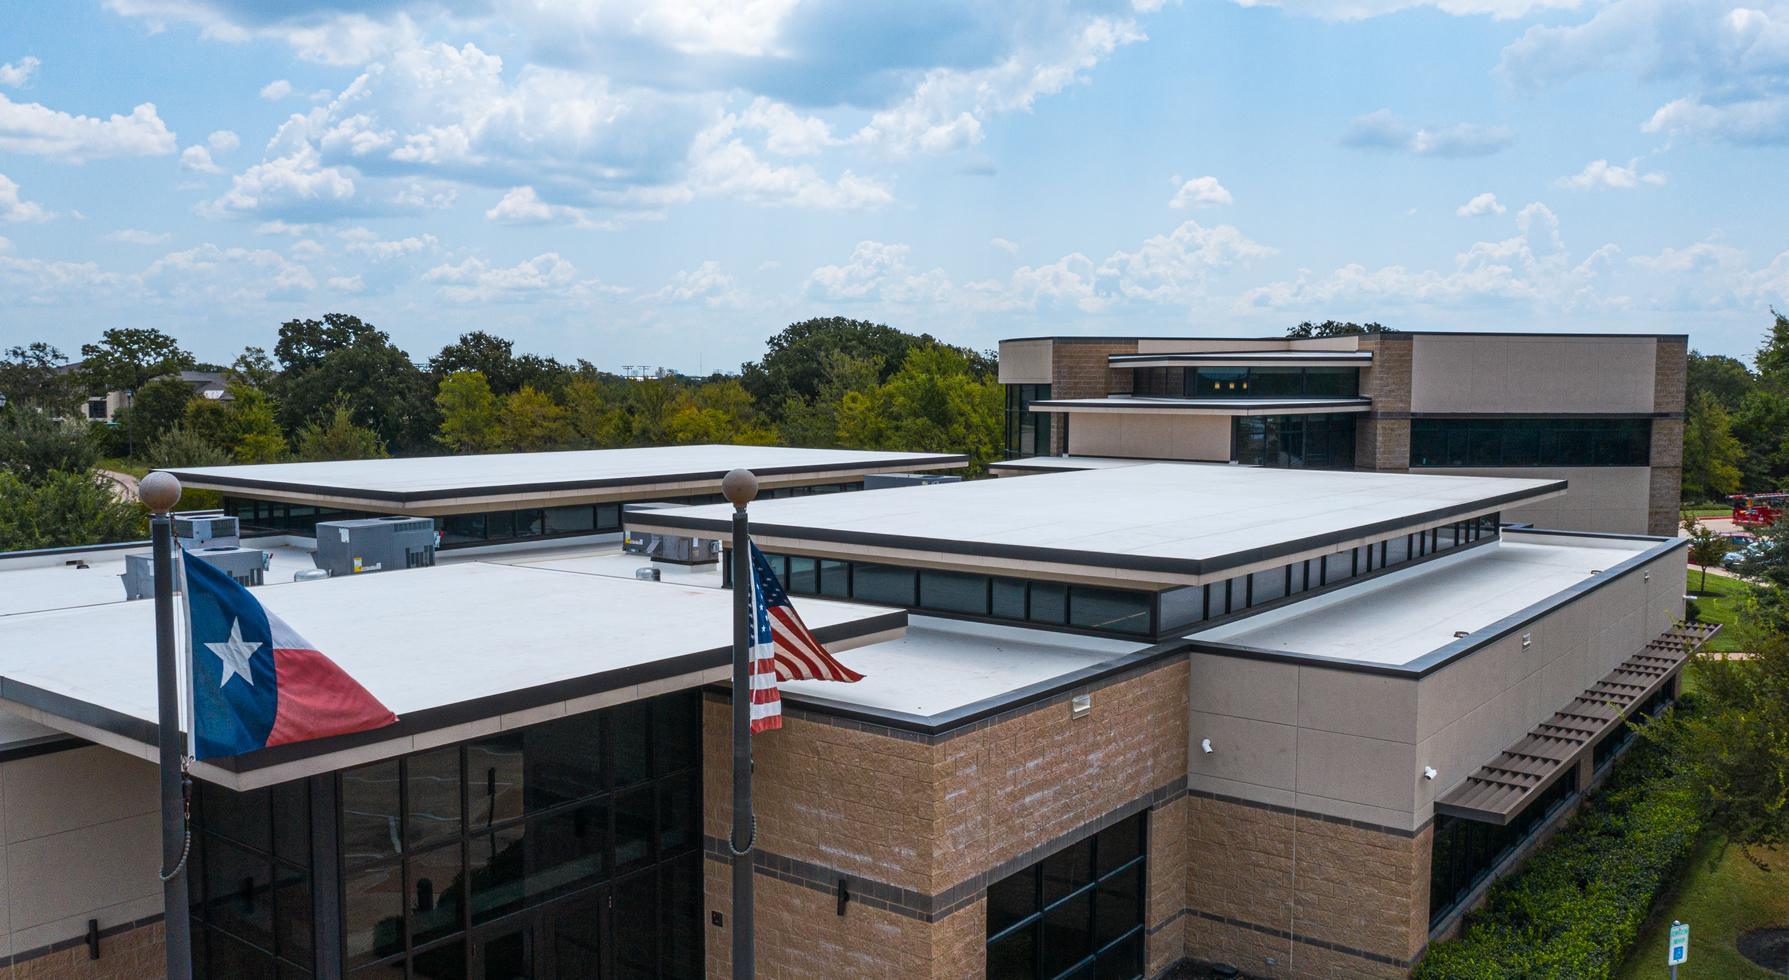 A San Antonio roofing company designed and built this white seven tier commercial flat roof.